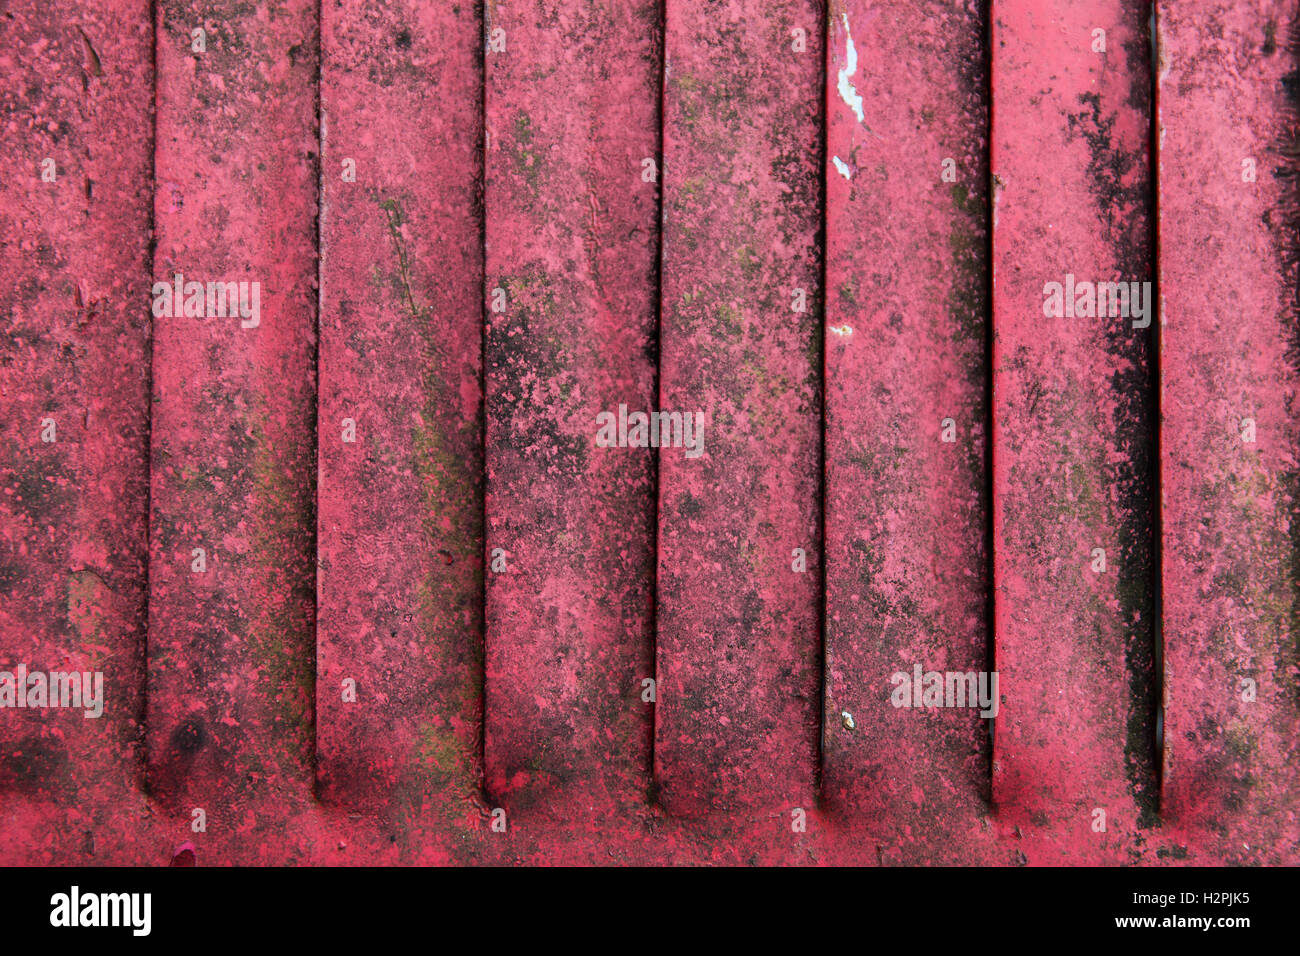 close up of old red rusty metal flaps Stock Photo